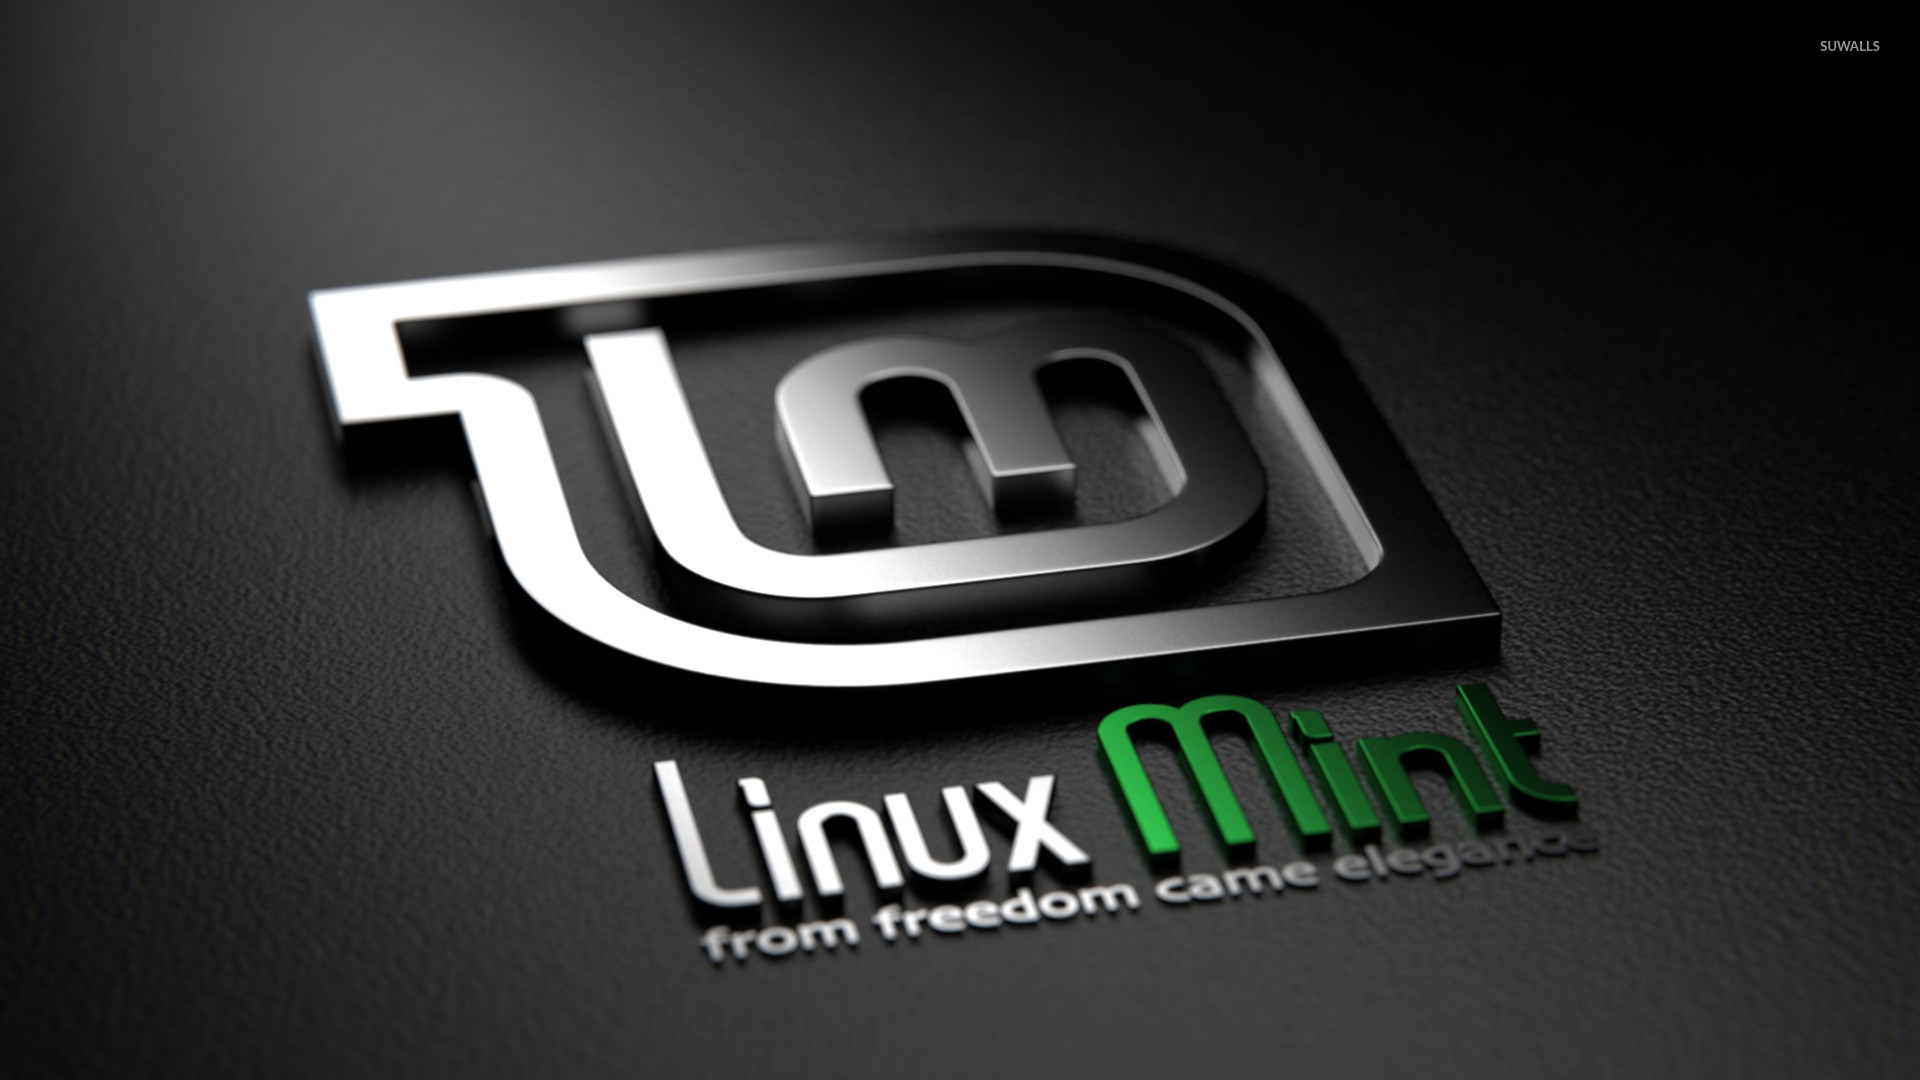 1920x1080 Abstract linux HD Wallpaper | Wallpapers | Pinterest | Linux and Hd  wallpaper